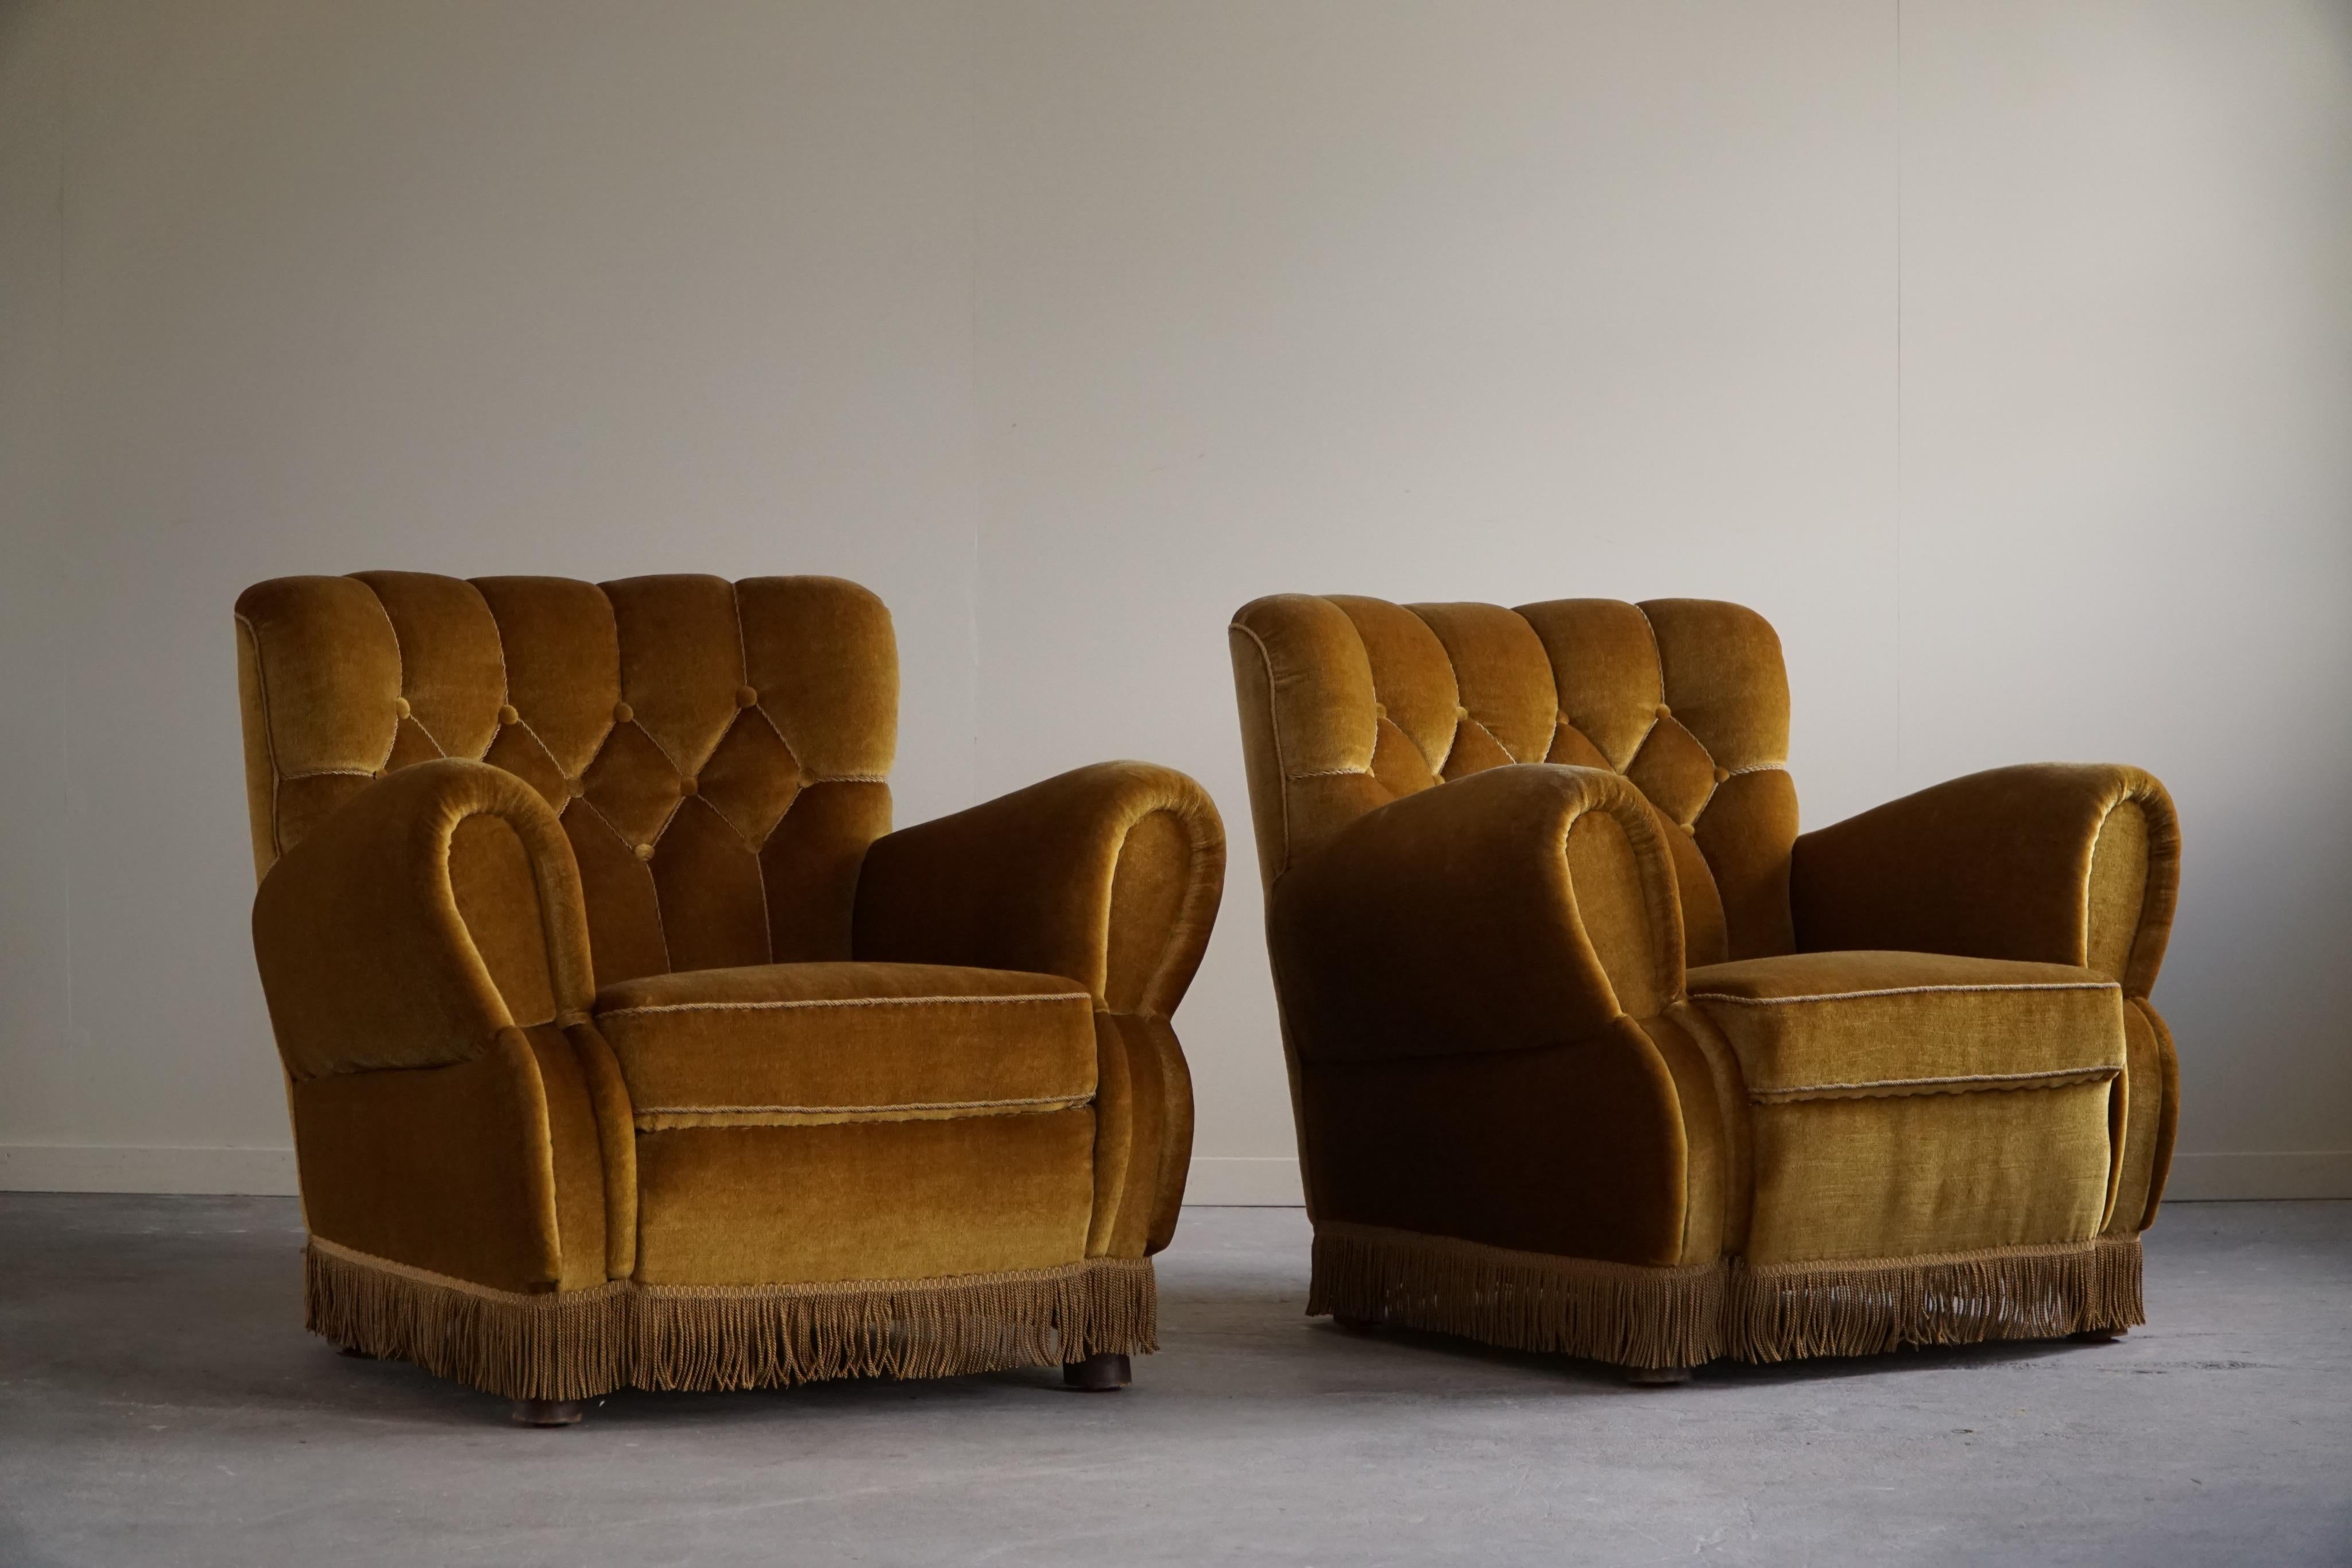 A Pair of Art Deco Lounge Chairs in Yellow Velour, Danish Carbinetmaker, 1940s For Sale 9